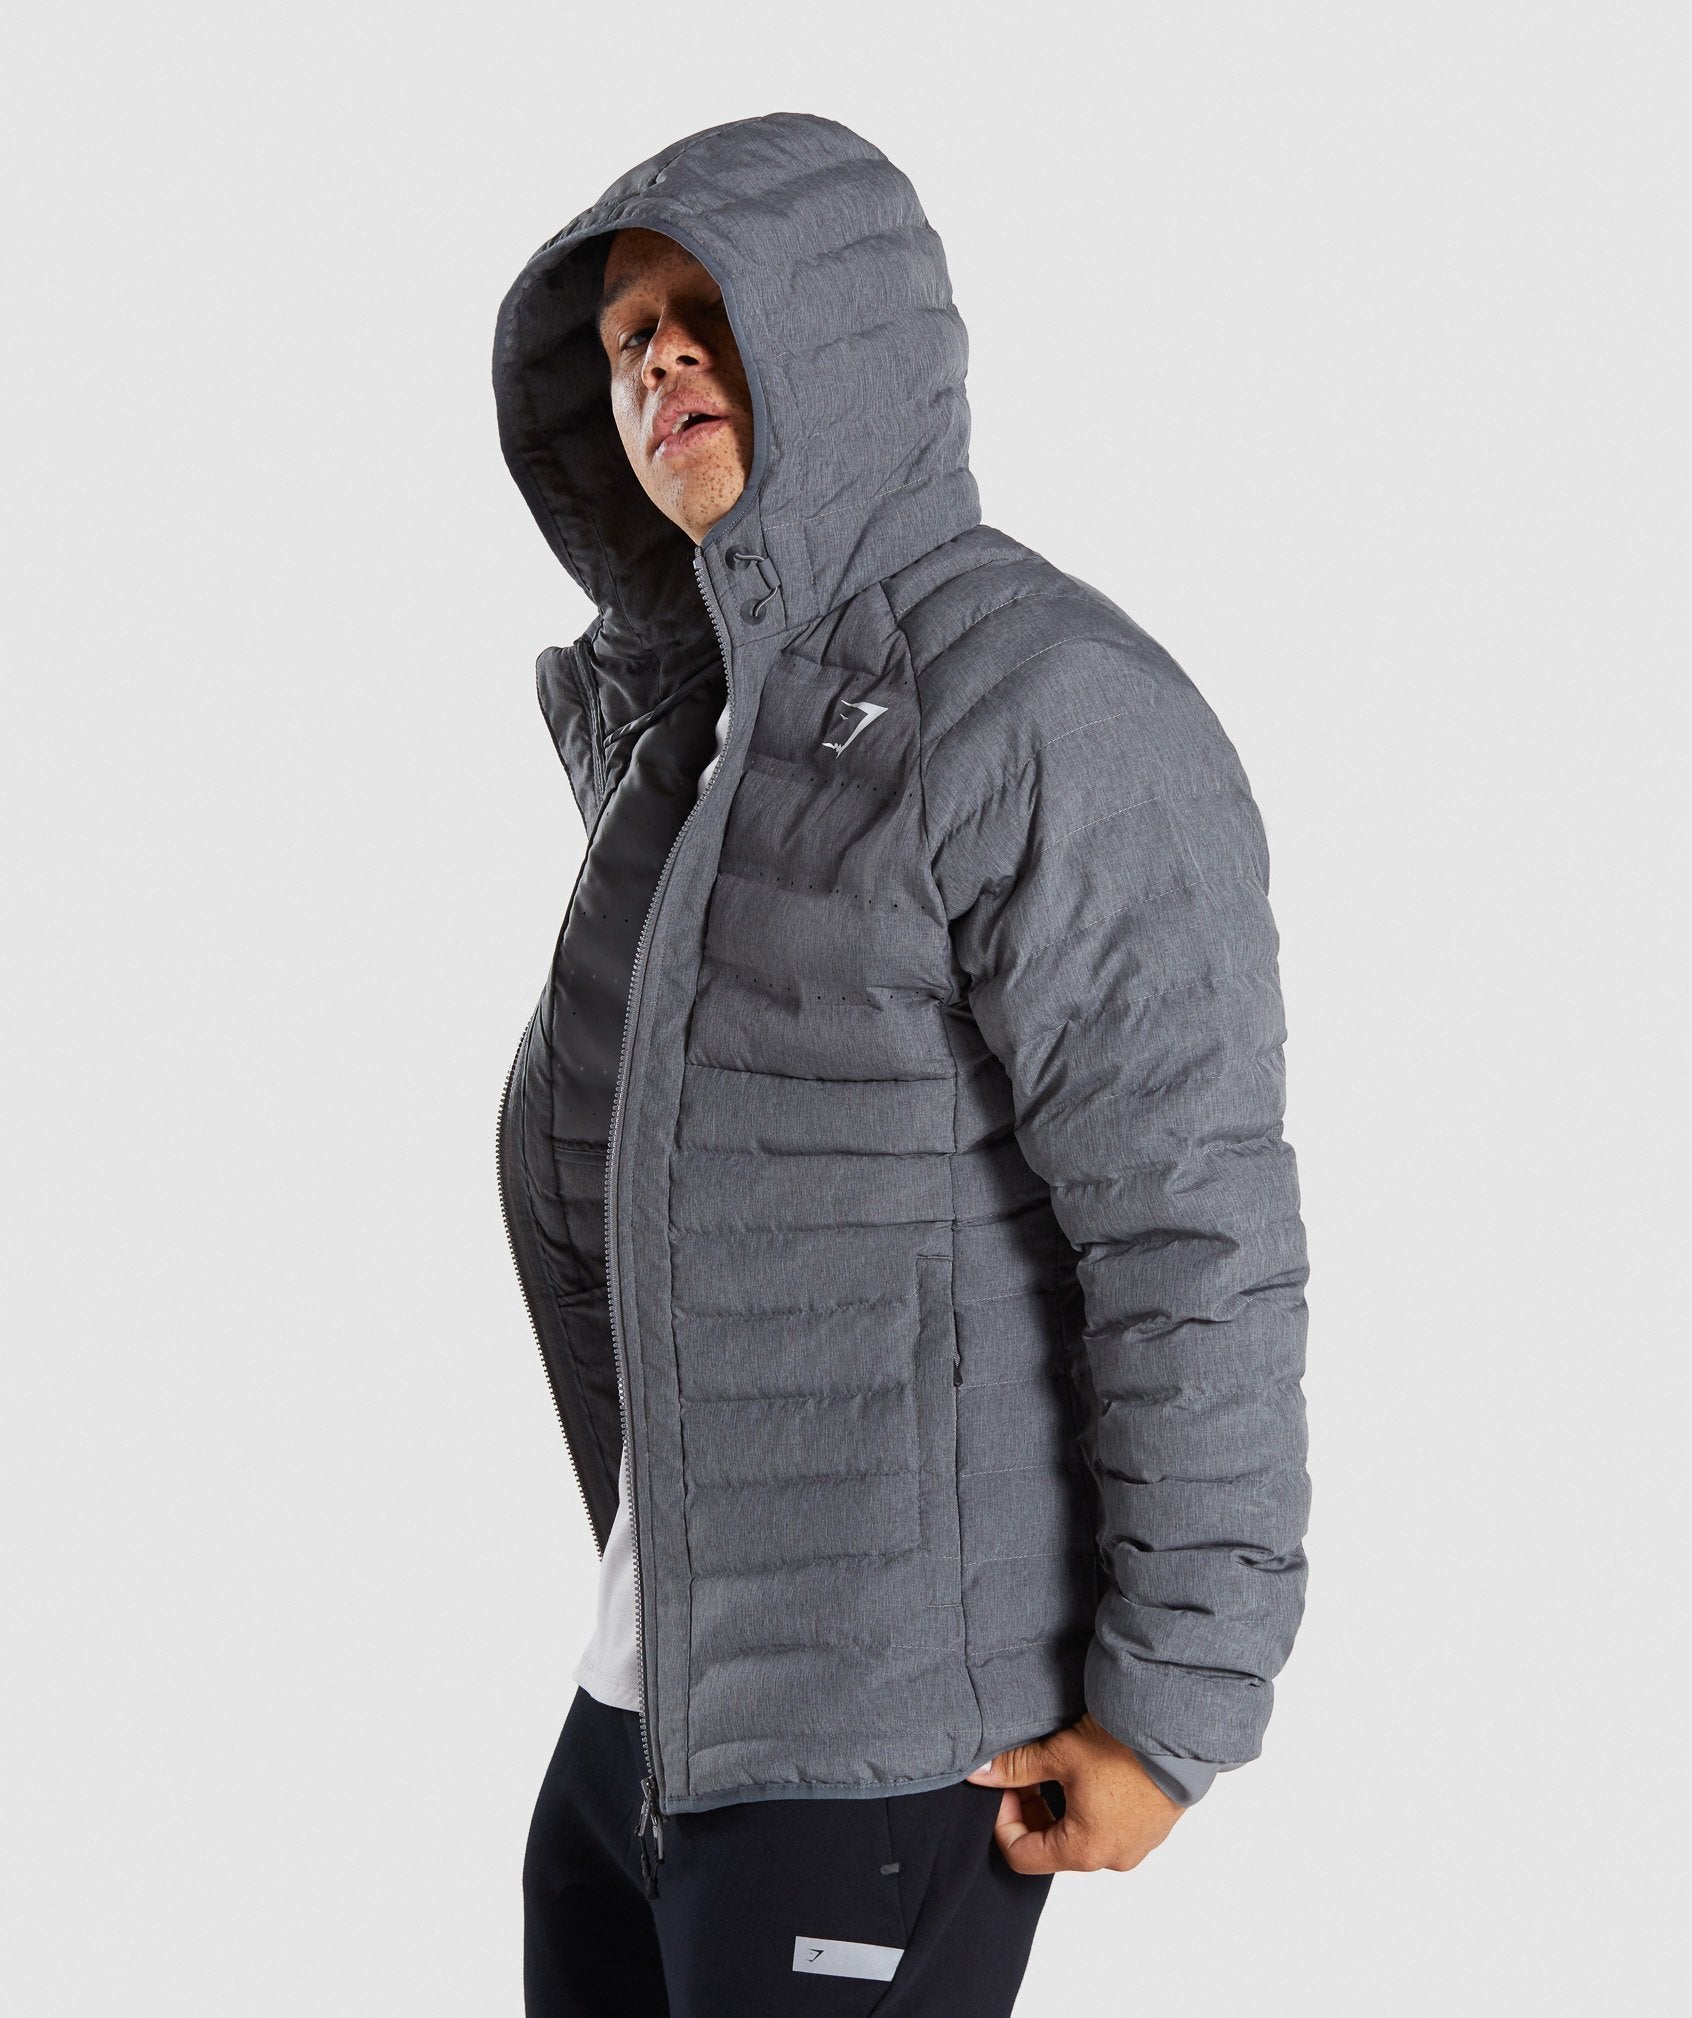 Sector Jacket V2 in Charcoal Marl - view 3